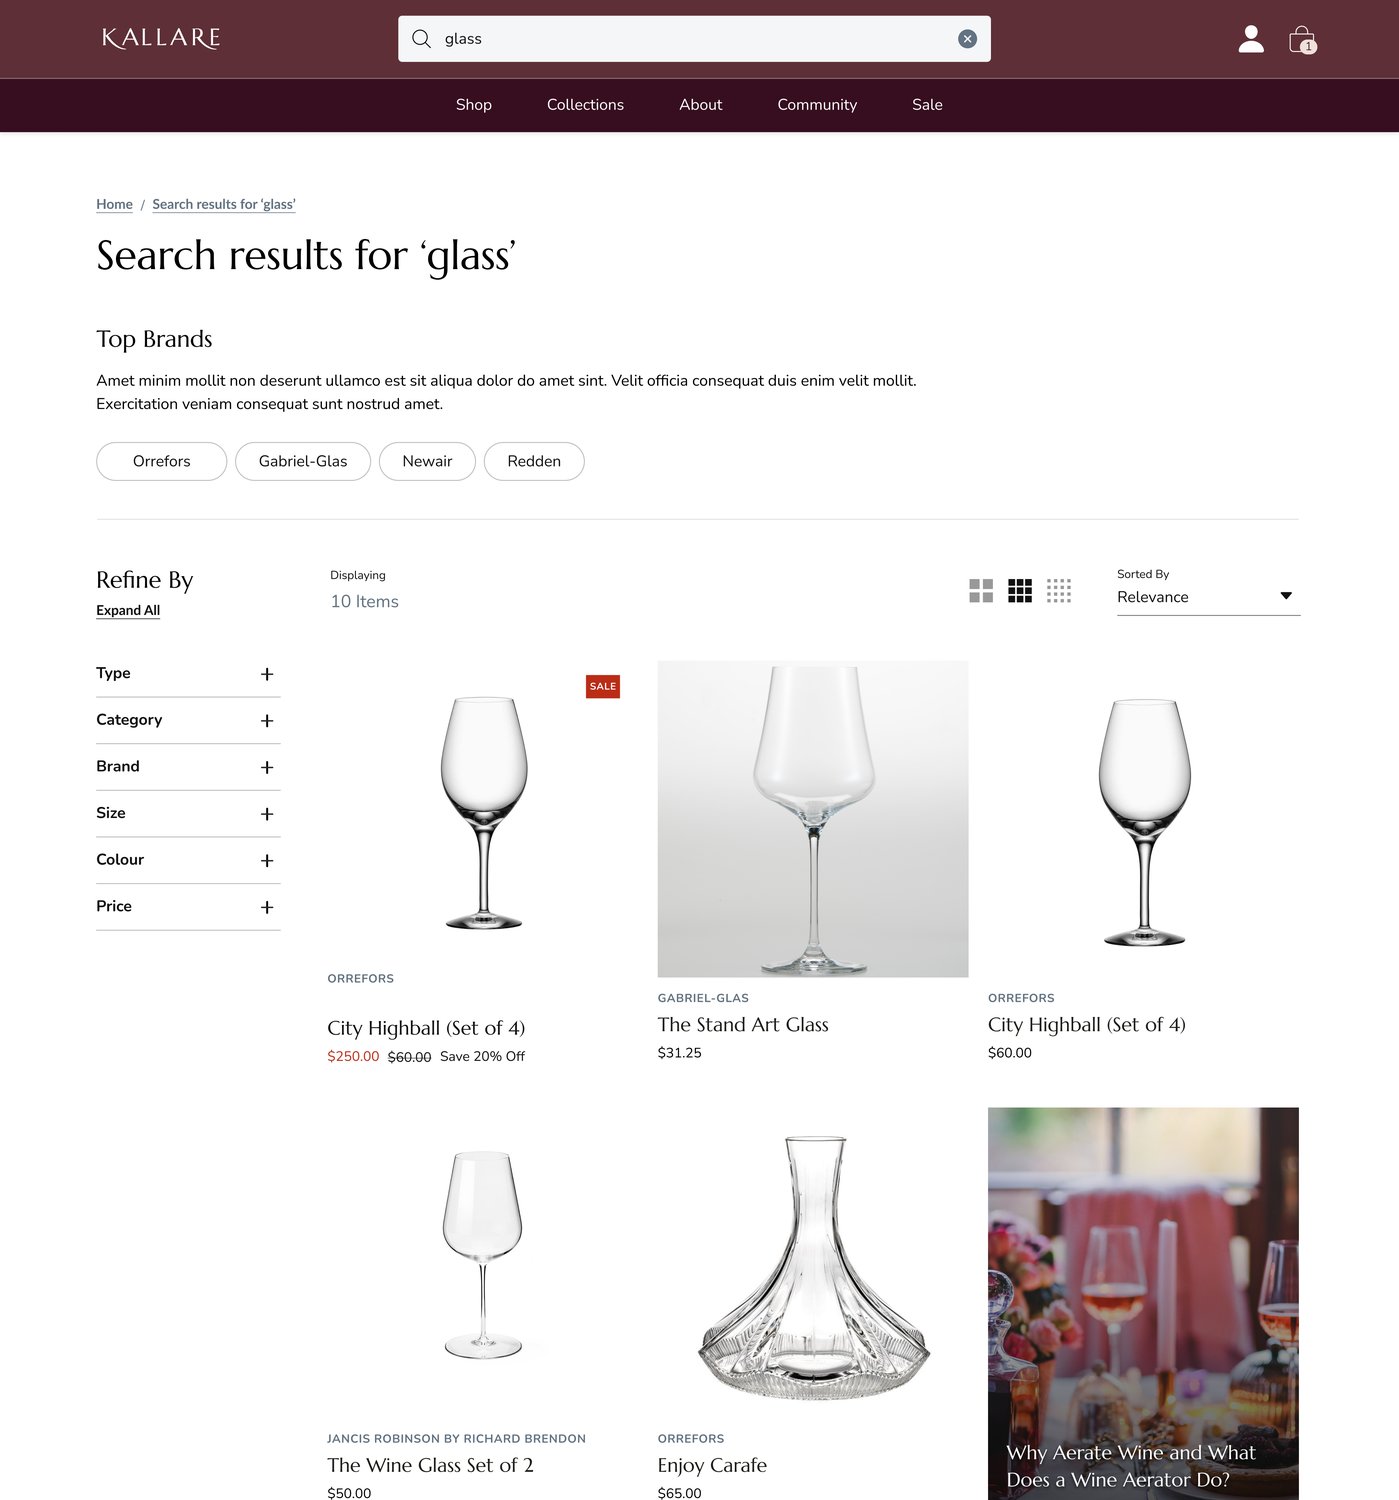 Image of a desktop website diplaying the results of a search for glass. 3 wine glasses are displayed with corresponding product group, product name, price, and discounts where applicable. A filter to refine results appears to the left of the screen.